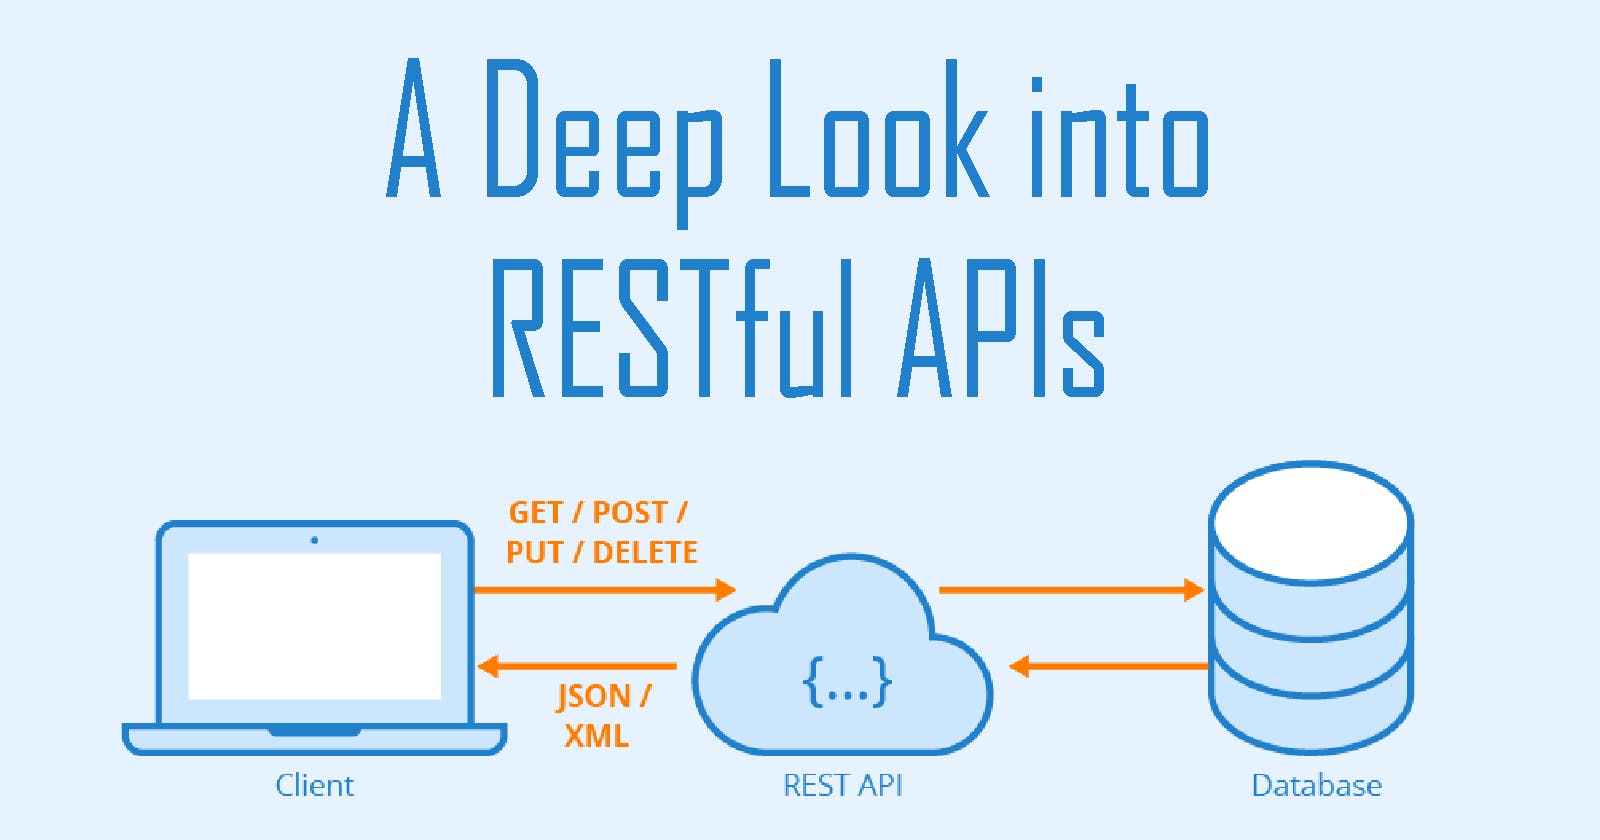 A Deep Look into RESTful APIs